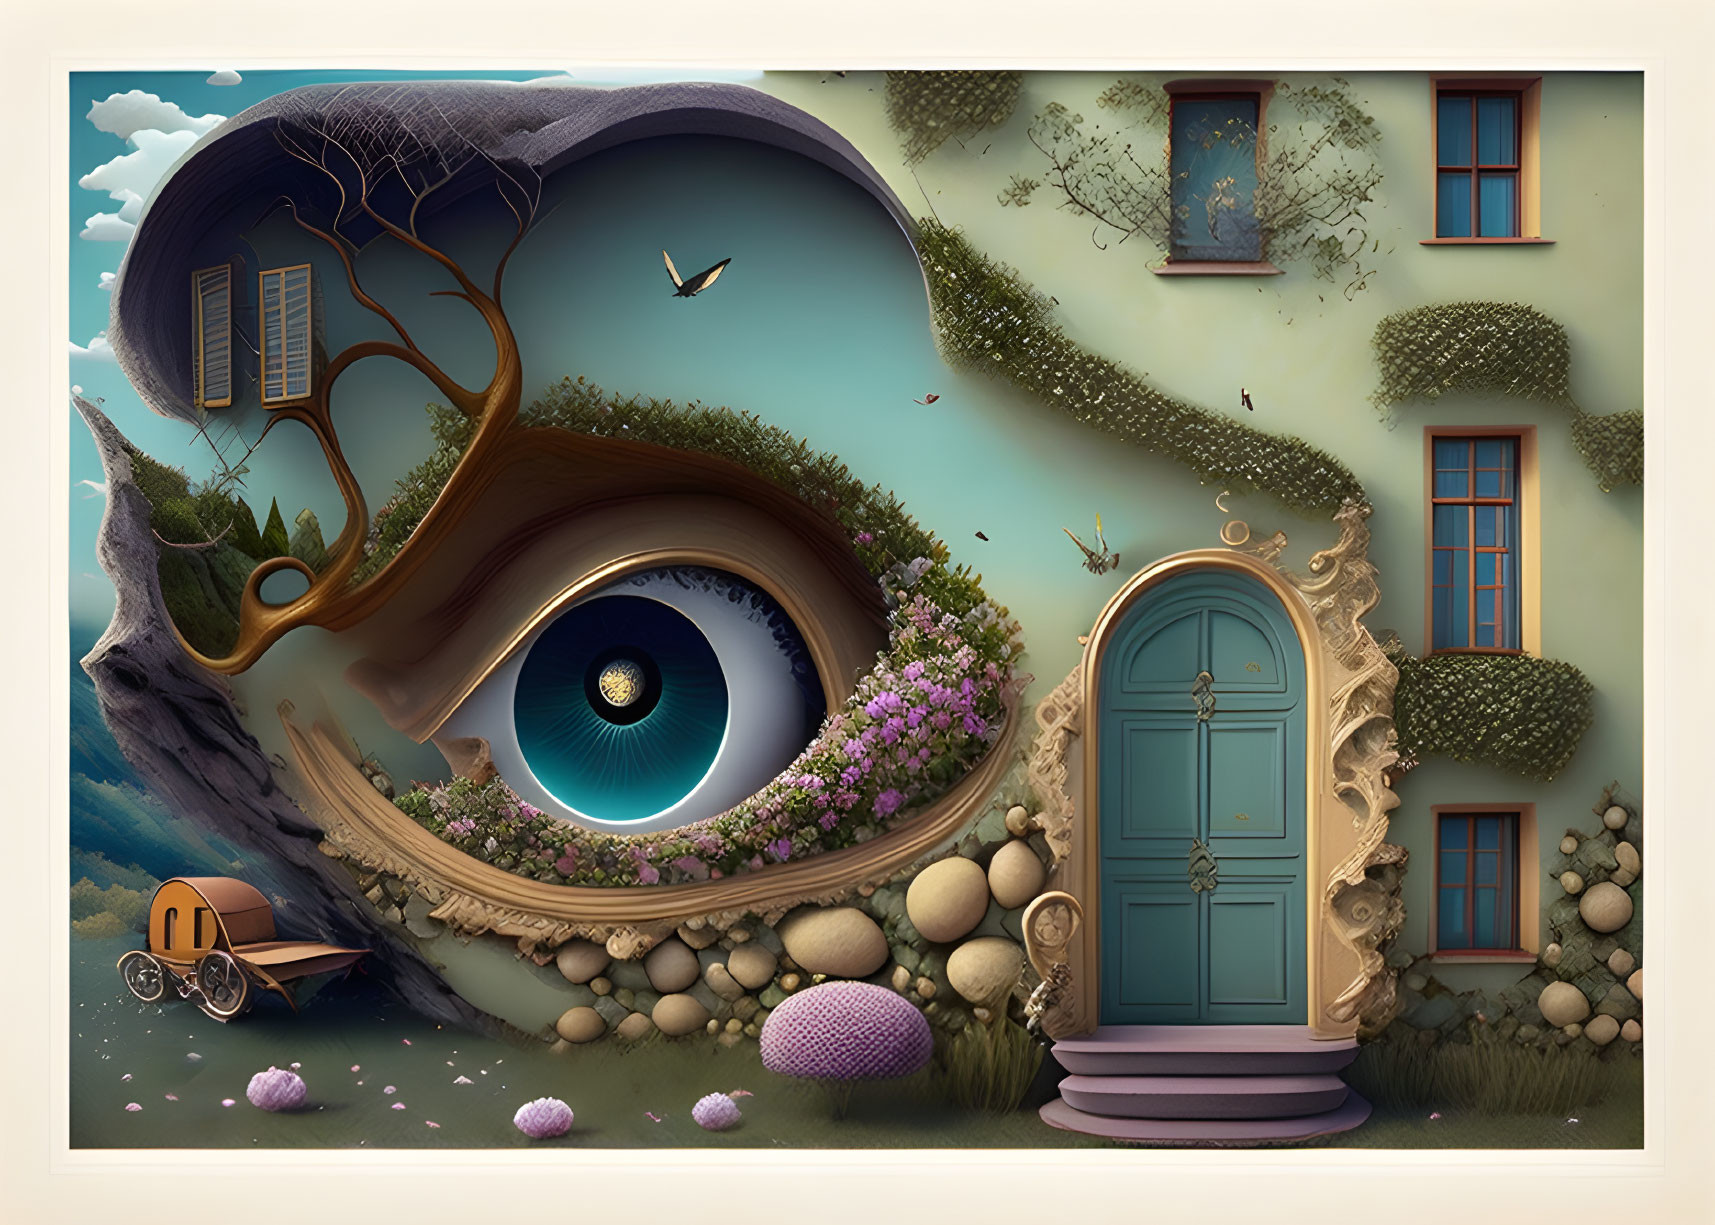 Surreal landscape featuring house styled as human eye, surrounded by greenery and quaint elements